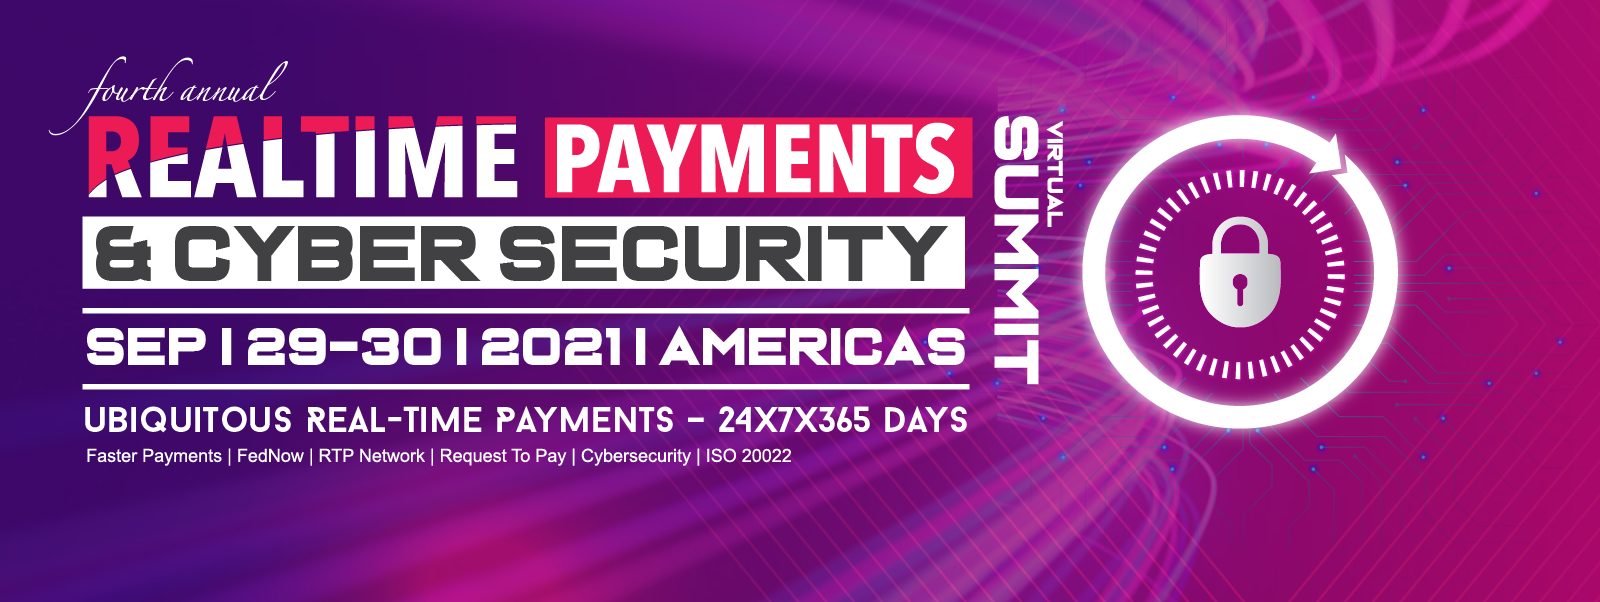 Real-Time Payments & Cybersecurity Summit